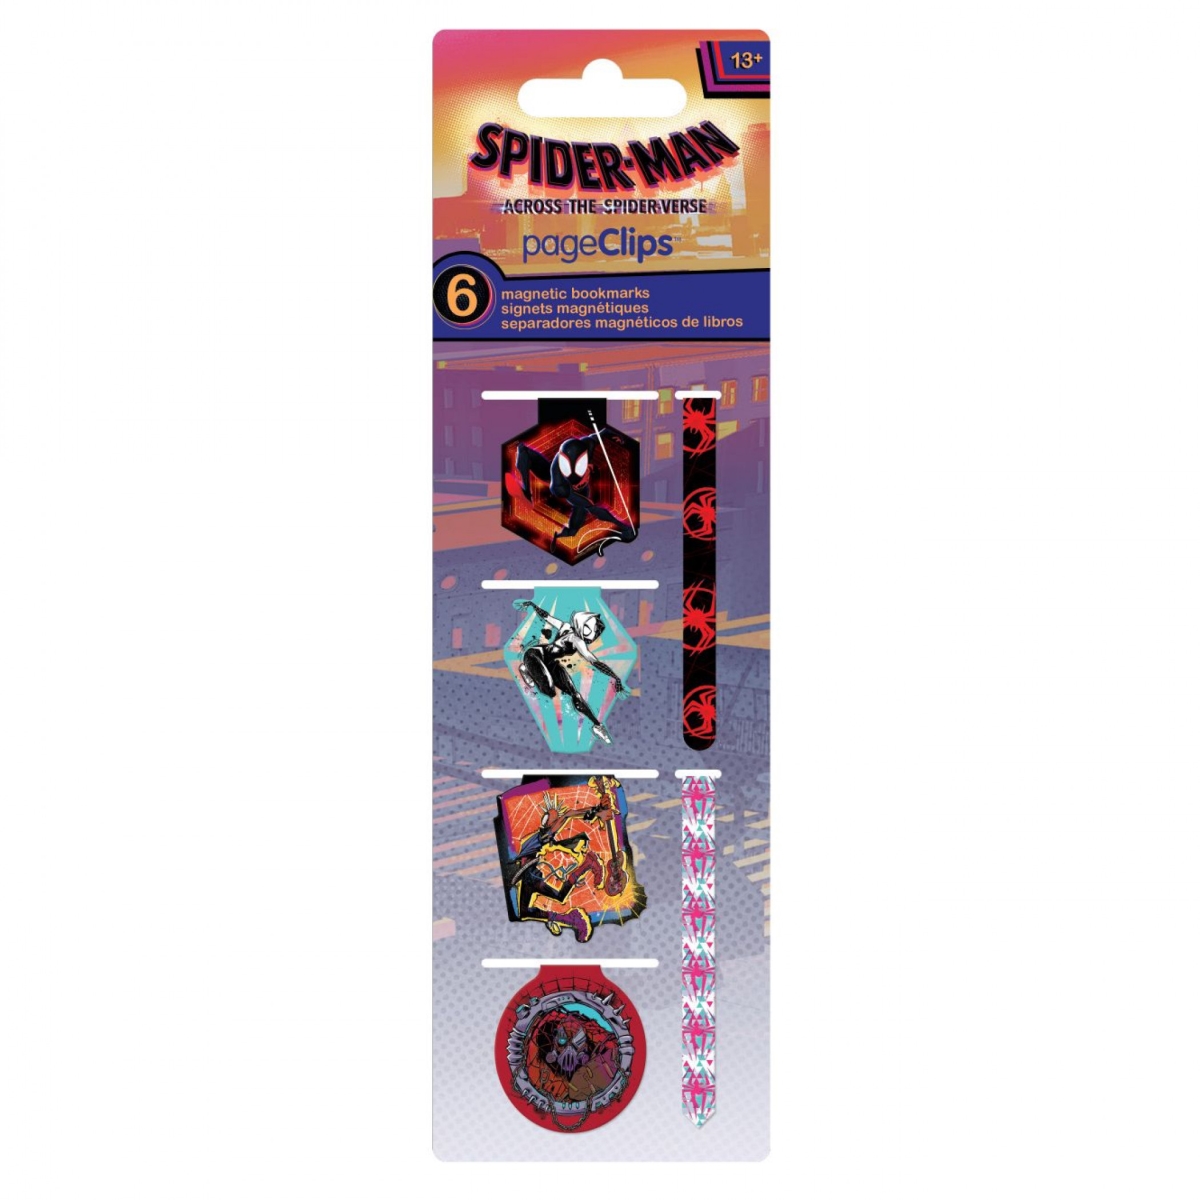 Picture of The Spider-Verse 866507 Spider-Man Across the Spider-Verse Magnetic Page Clip Bookmarks